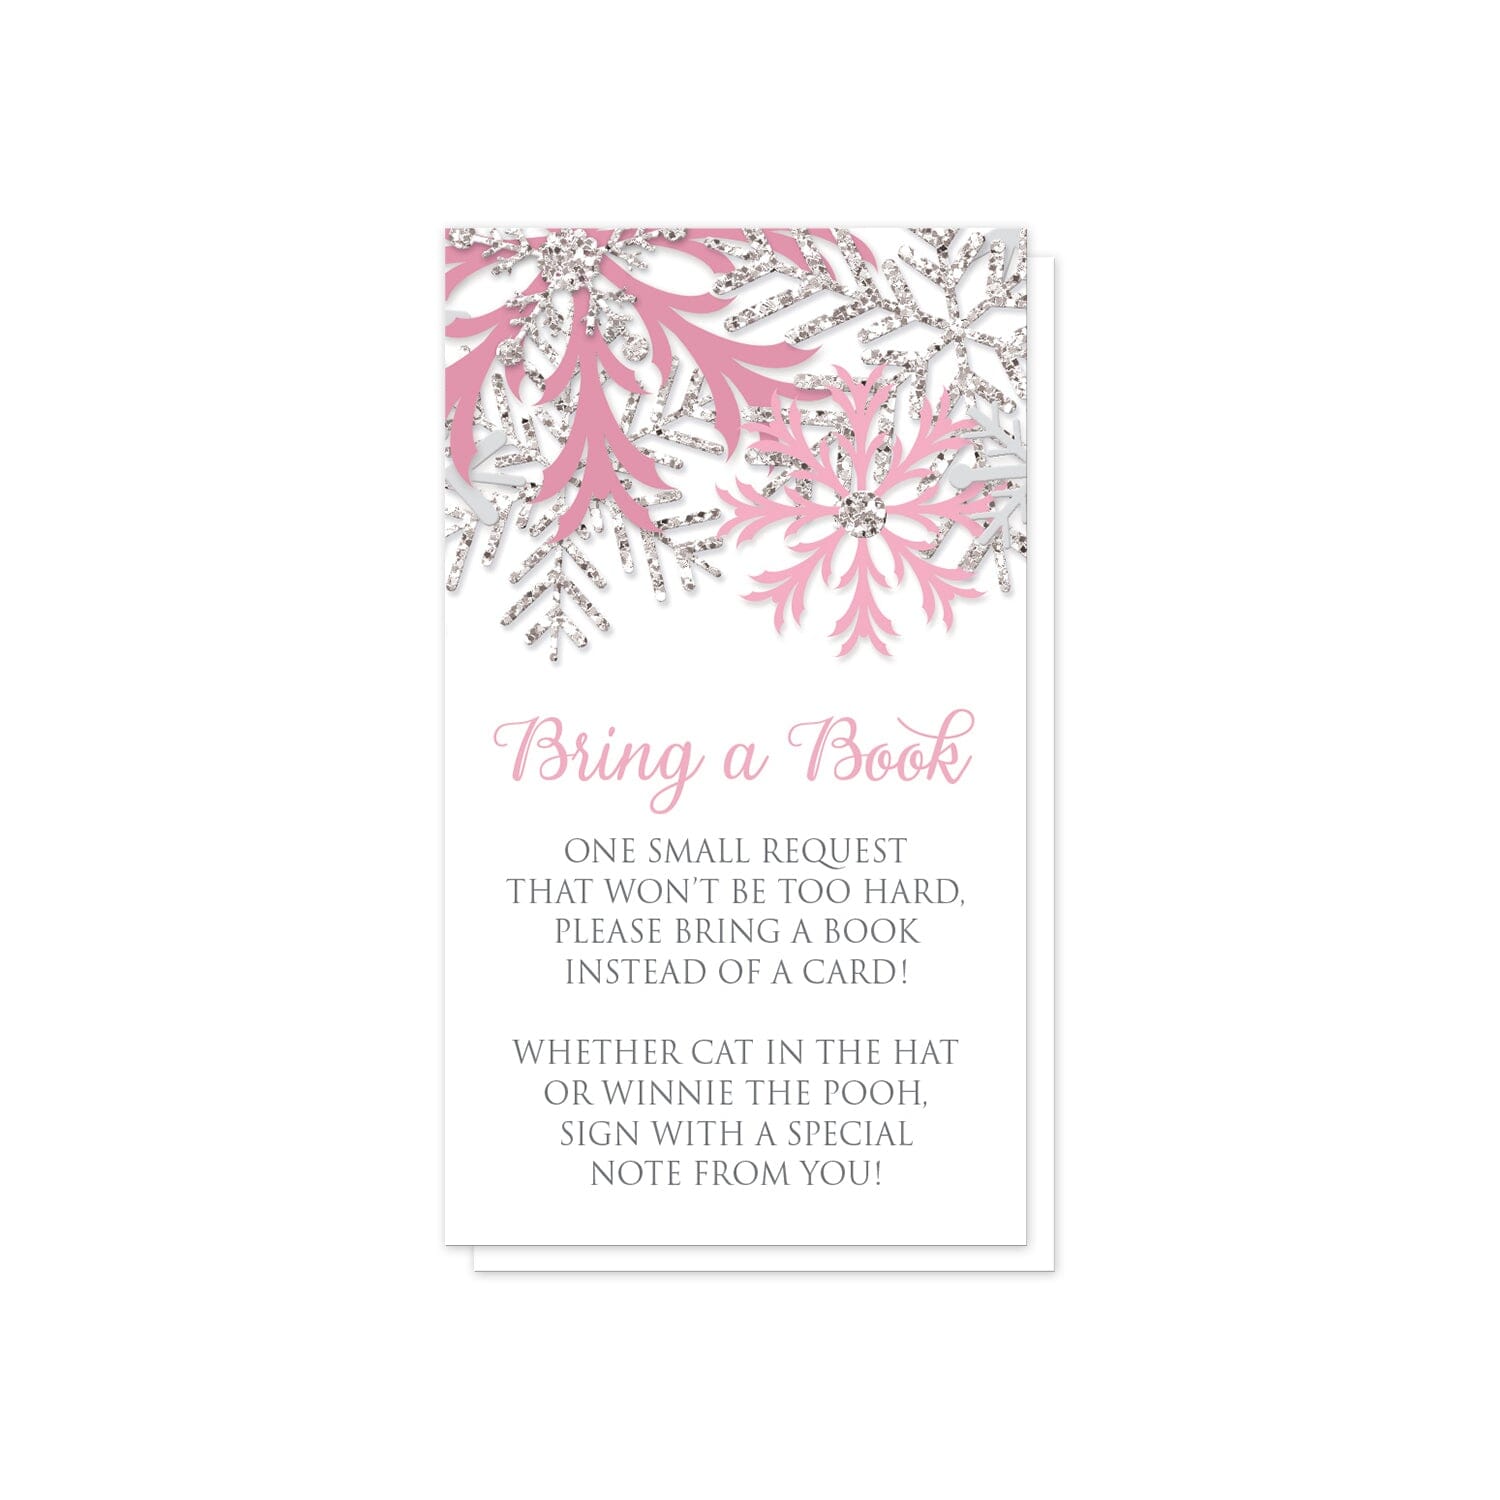 Winter Pink Silver Snowflake Bring a Book Cards at Artistically Invited. Pretty winter pink silver snowflake bring a book cards designed with pink, light pink, and silver-colored glitter-illustrated snowflakes along the top. Your book request details are printed in pink and gray over white below the snowflakes.